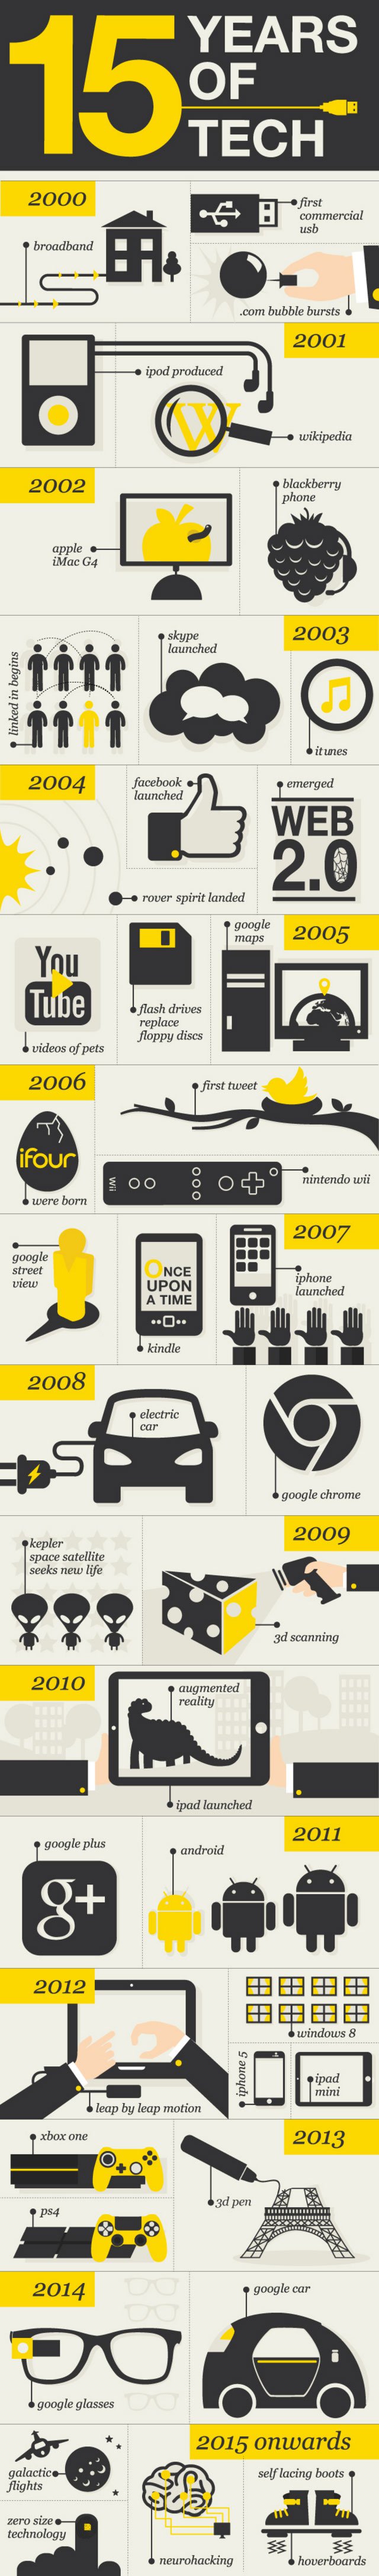 15 years of technology - tech